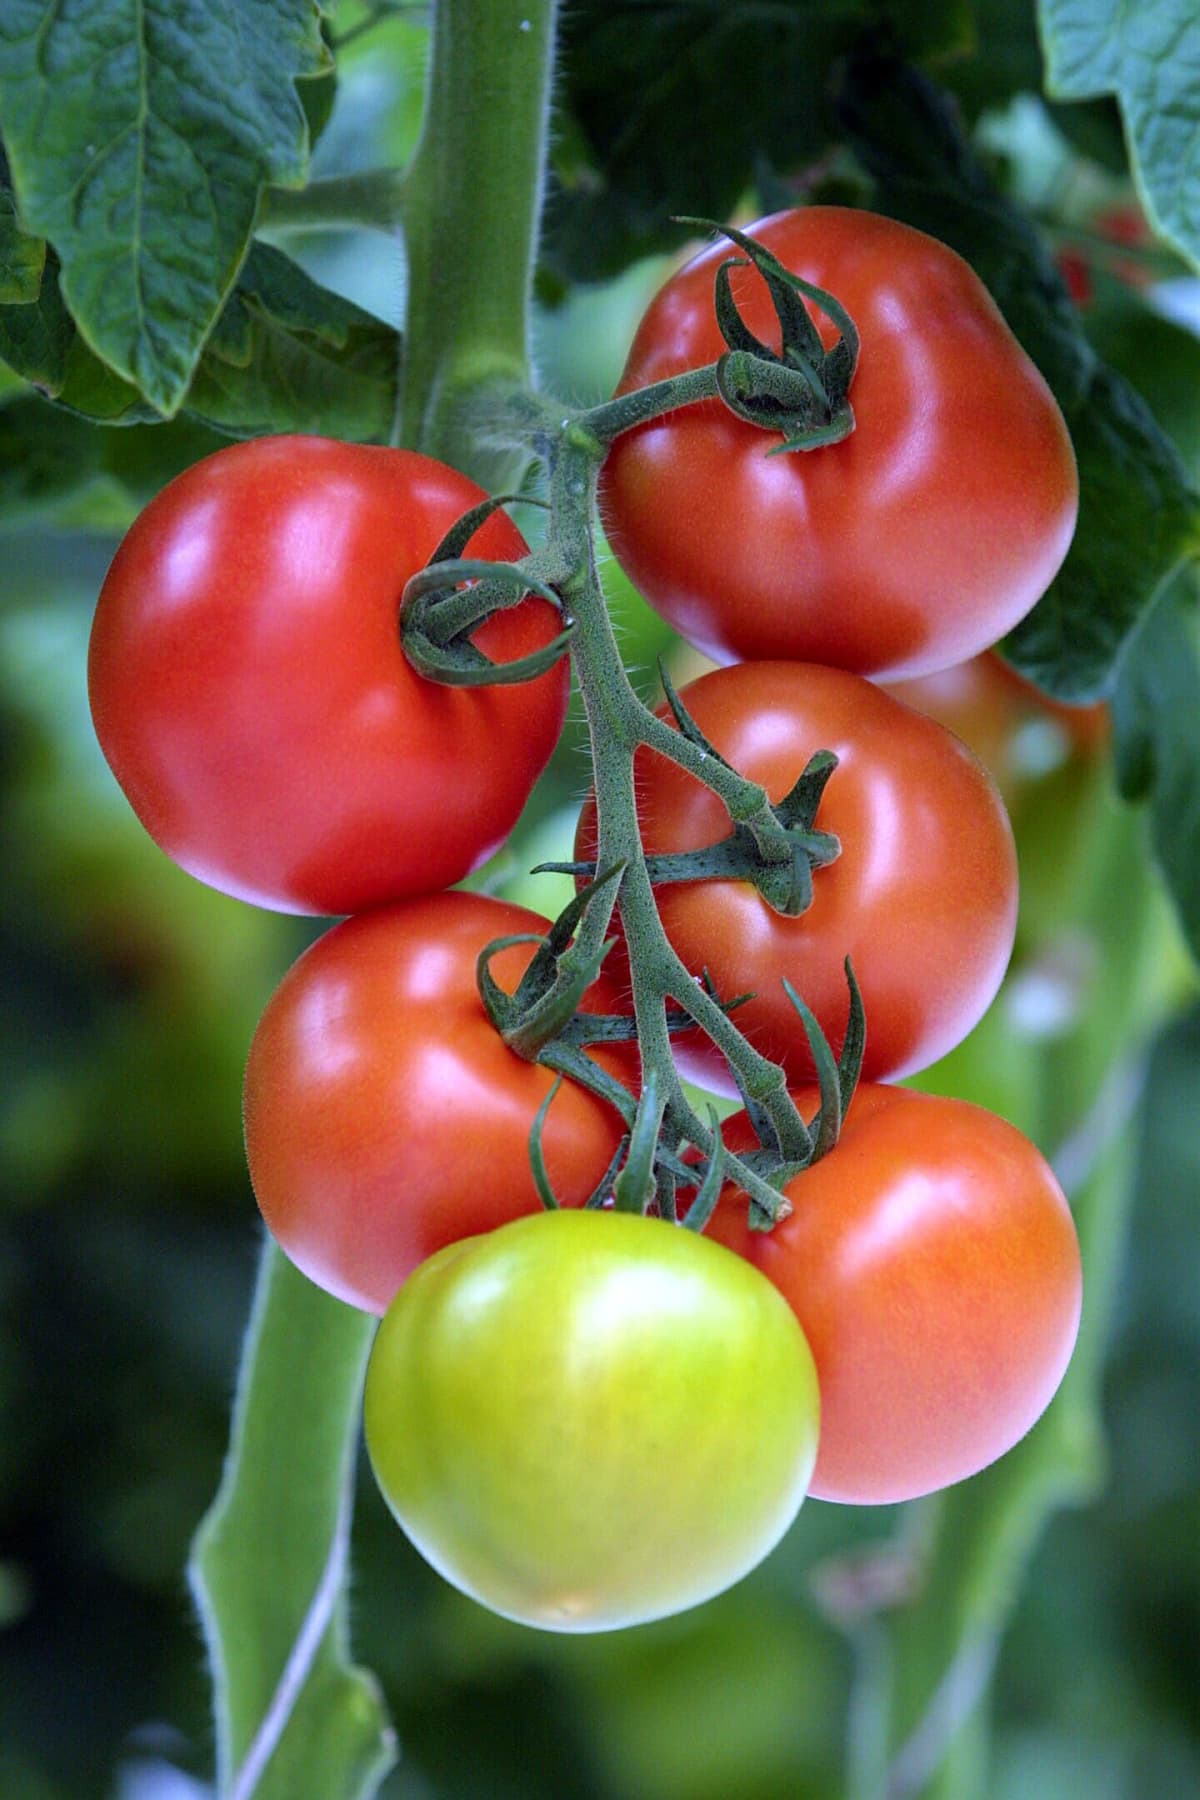 Tomatoes on the plant.